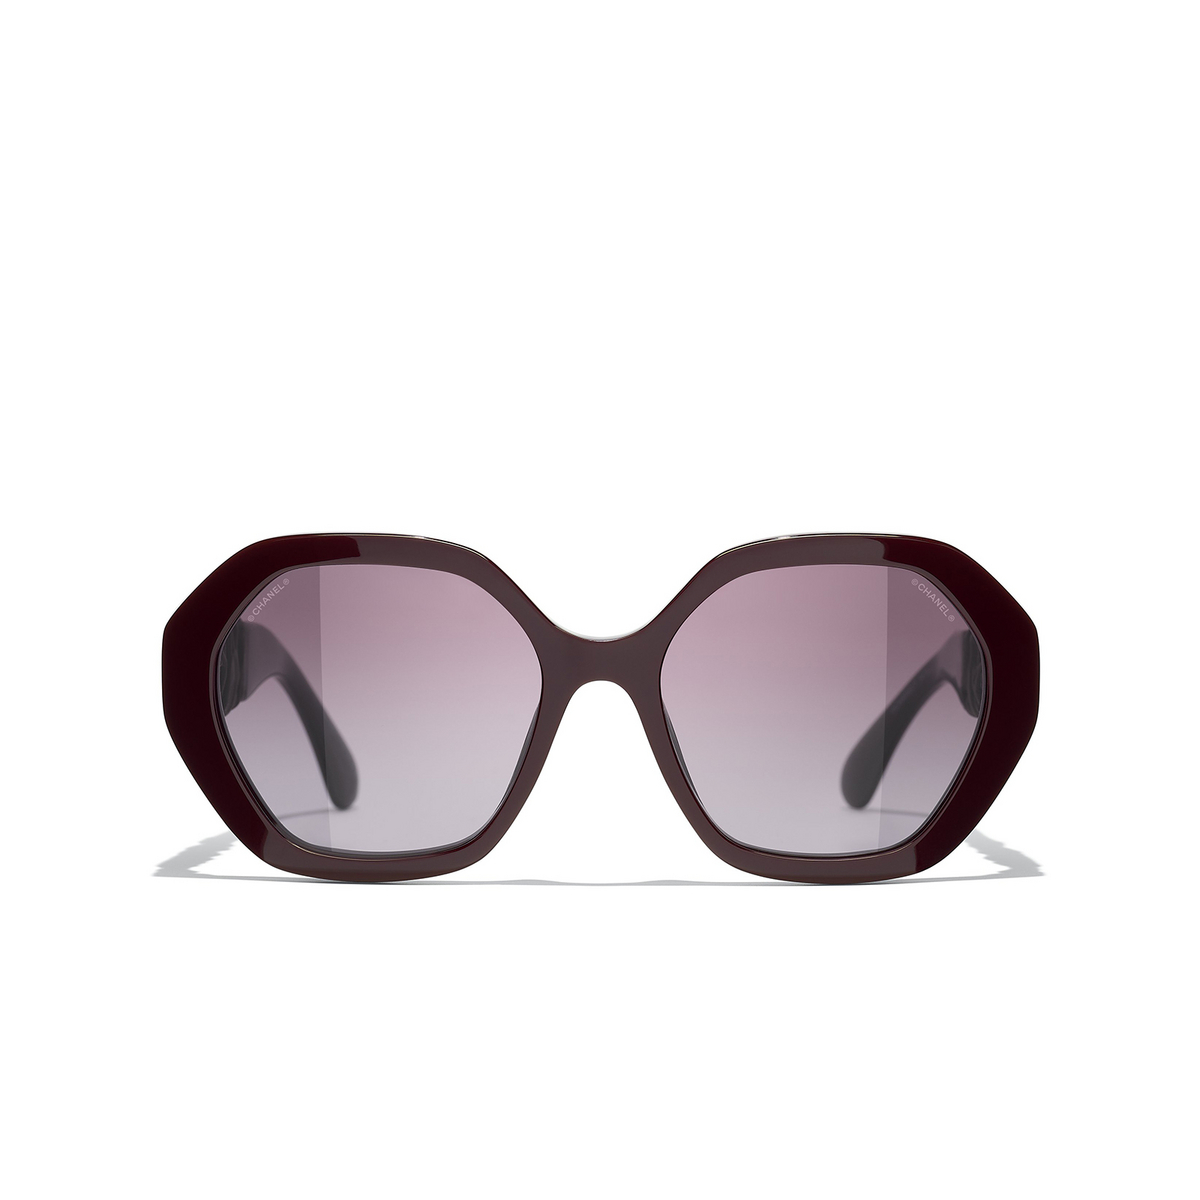 CHANEL round Sunglasses 1461S1 Burgundy - front view